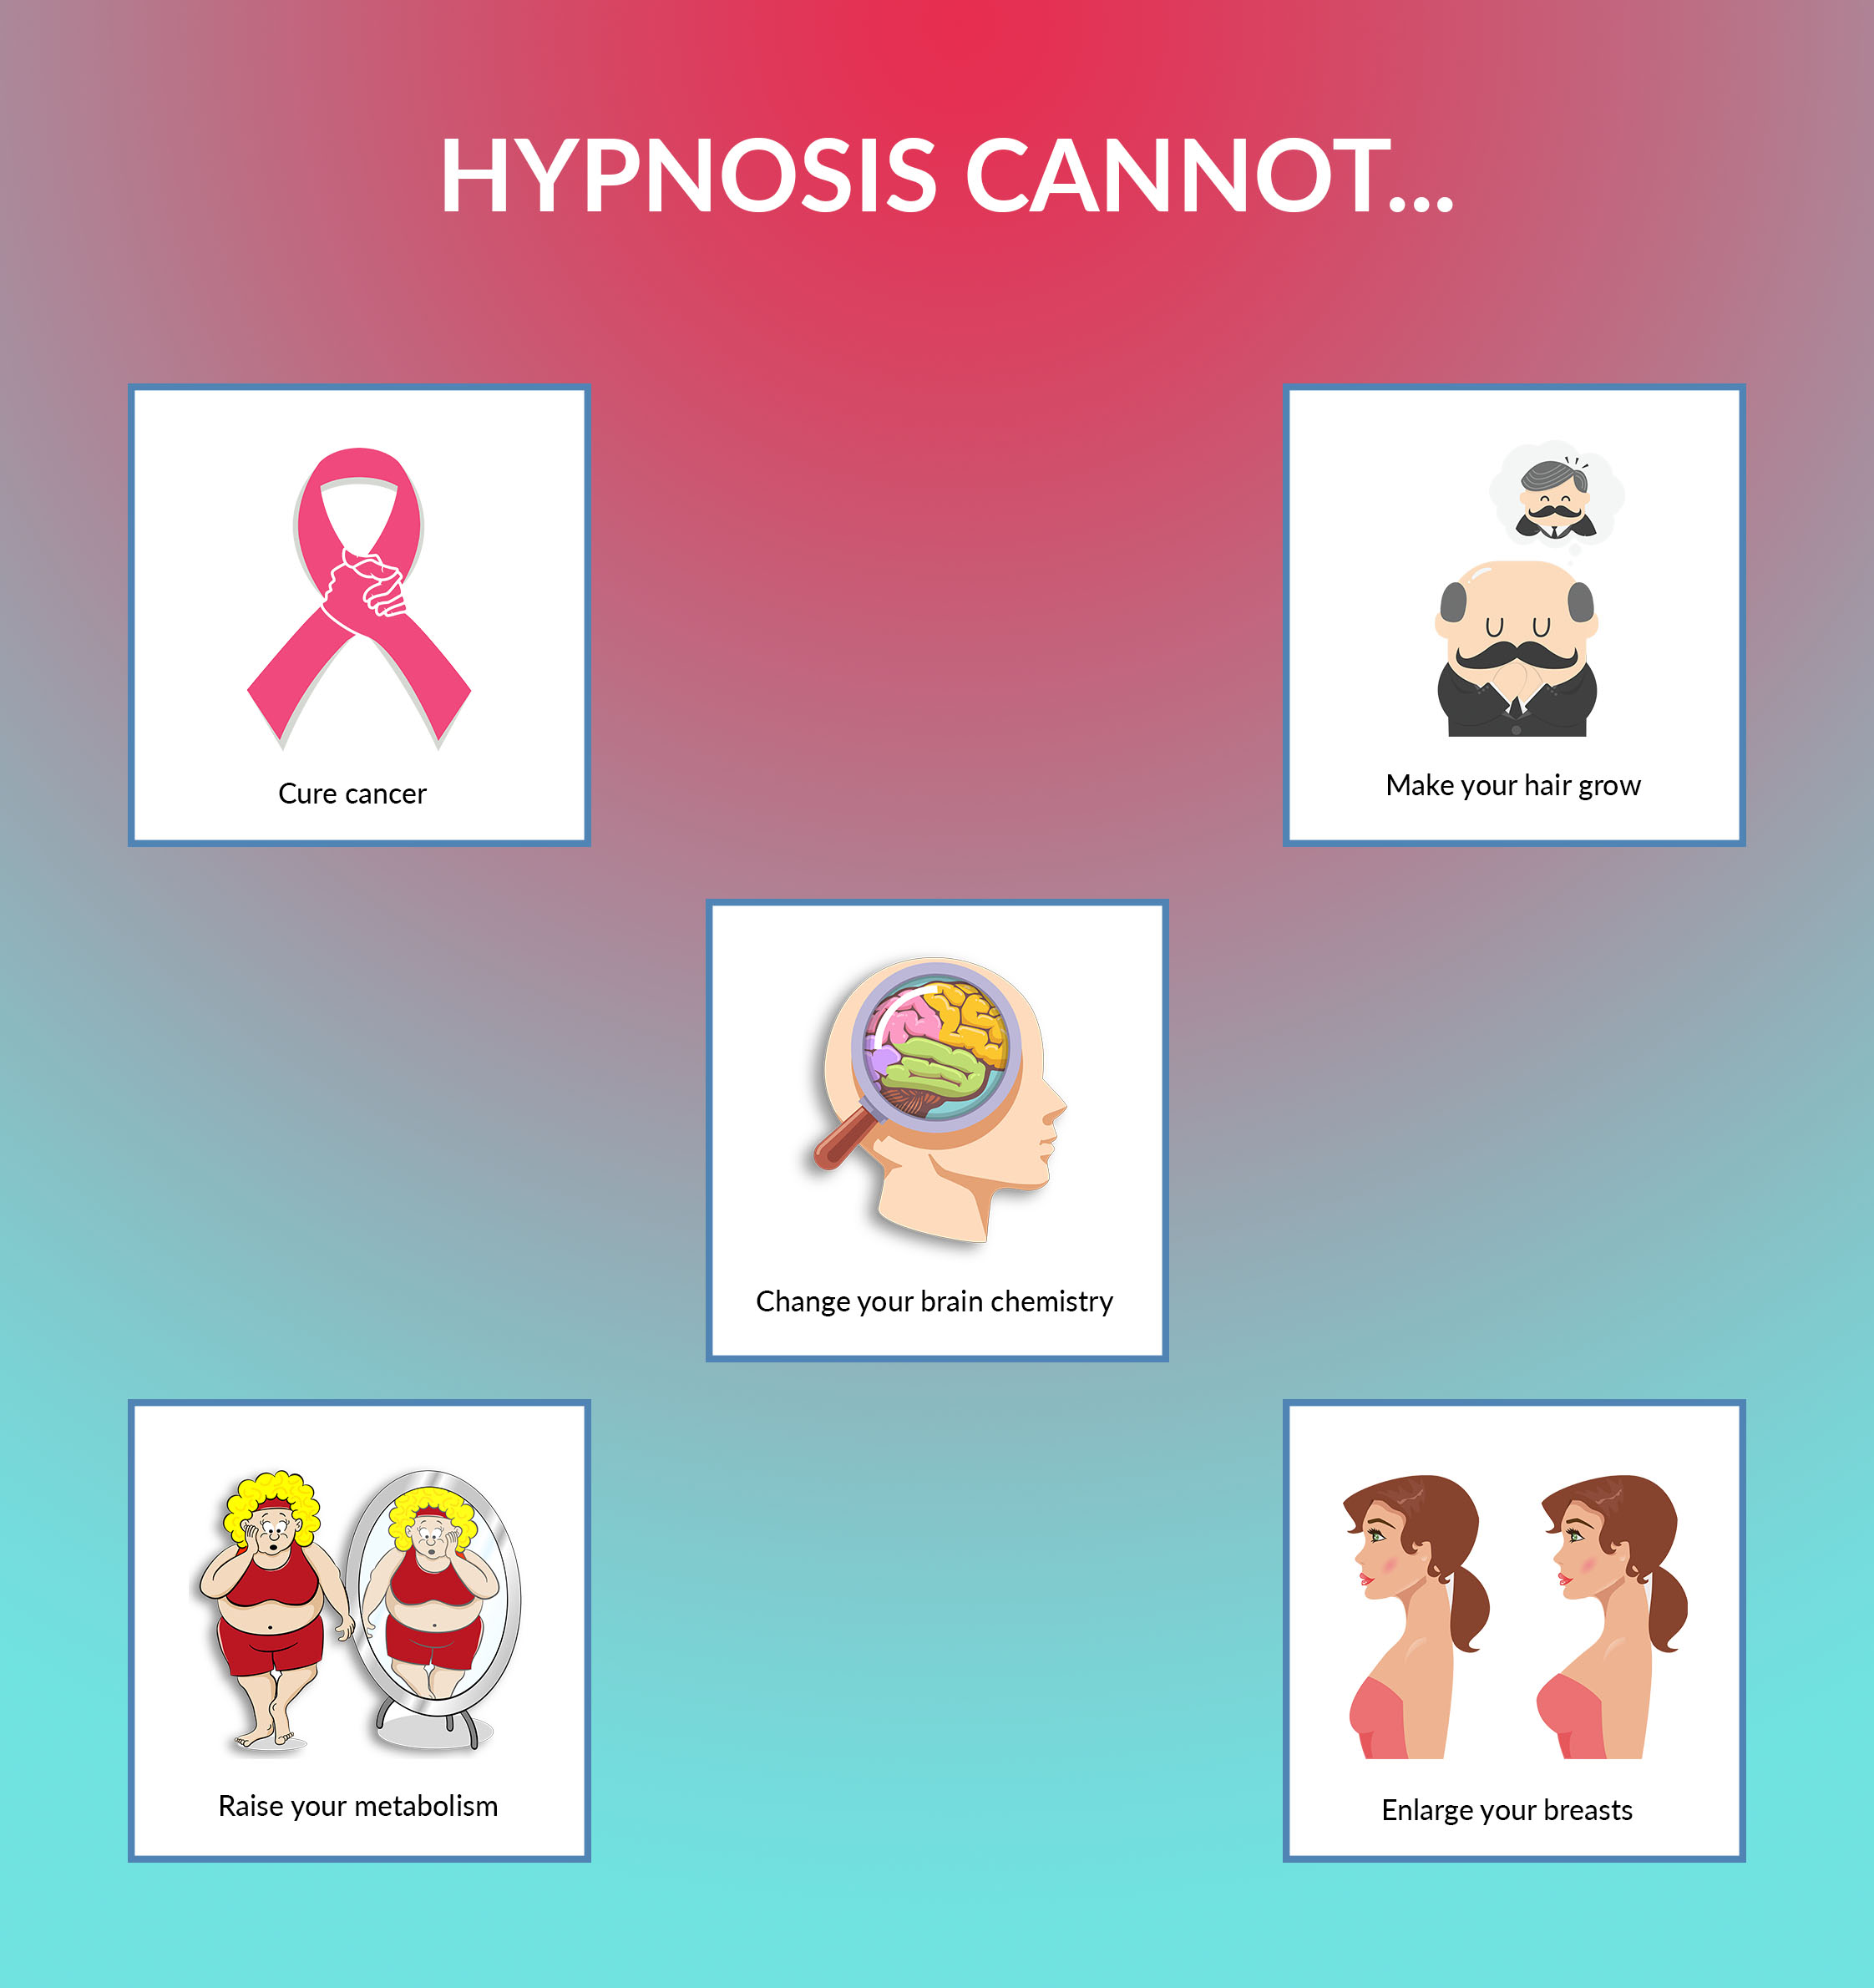 Conditions that cannot be treated by a hypnotherapist